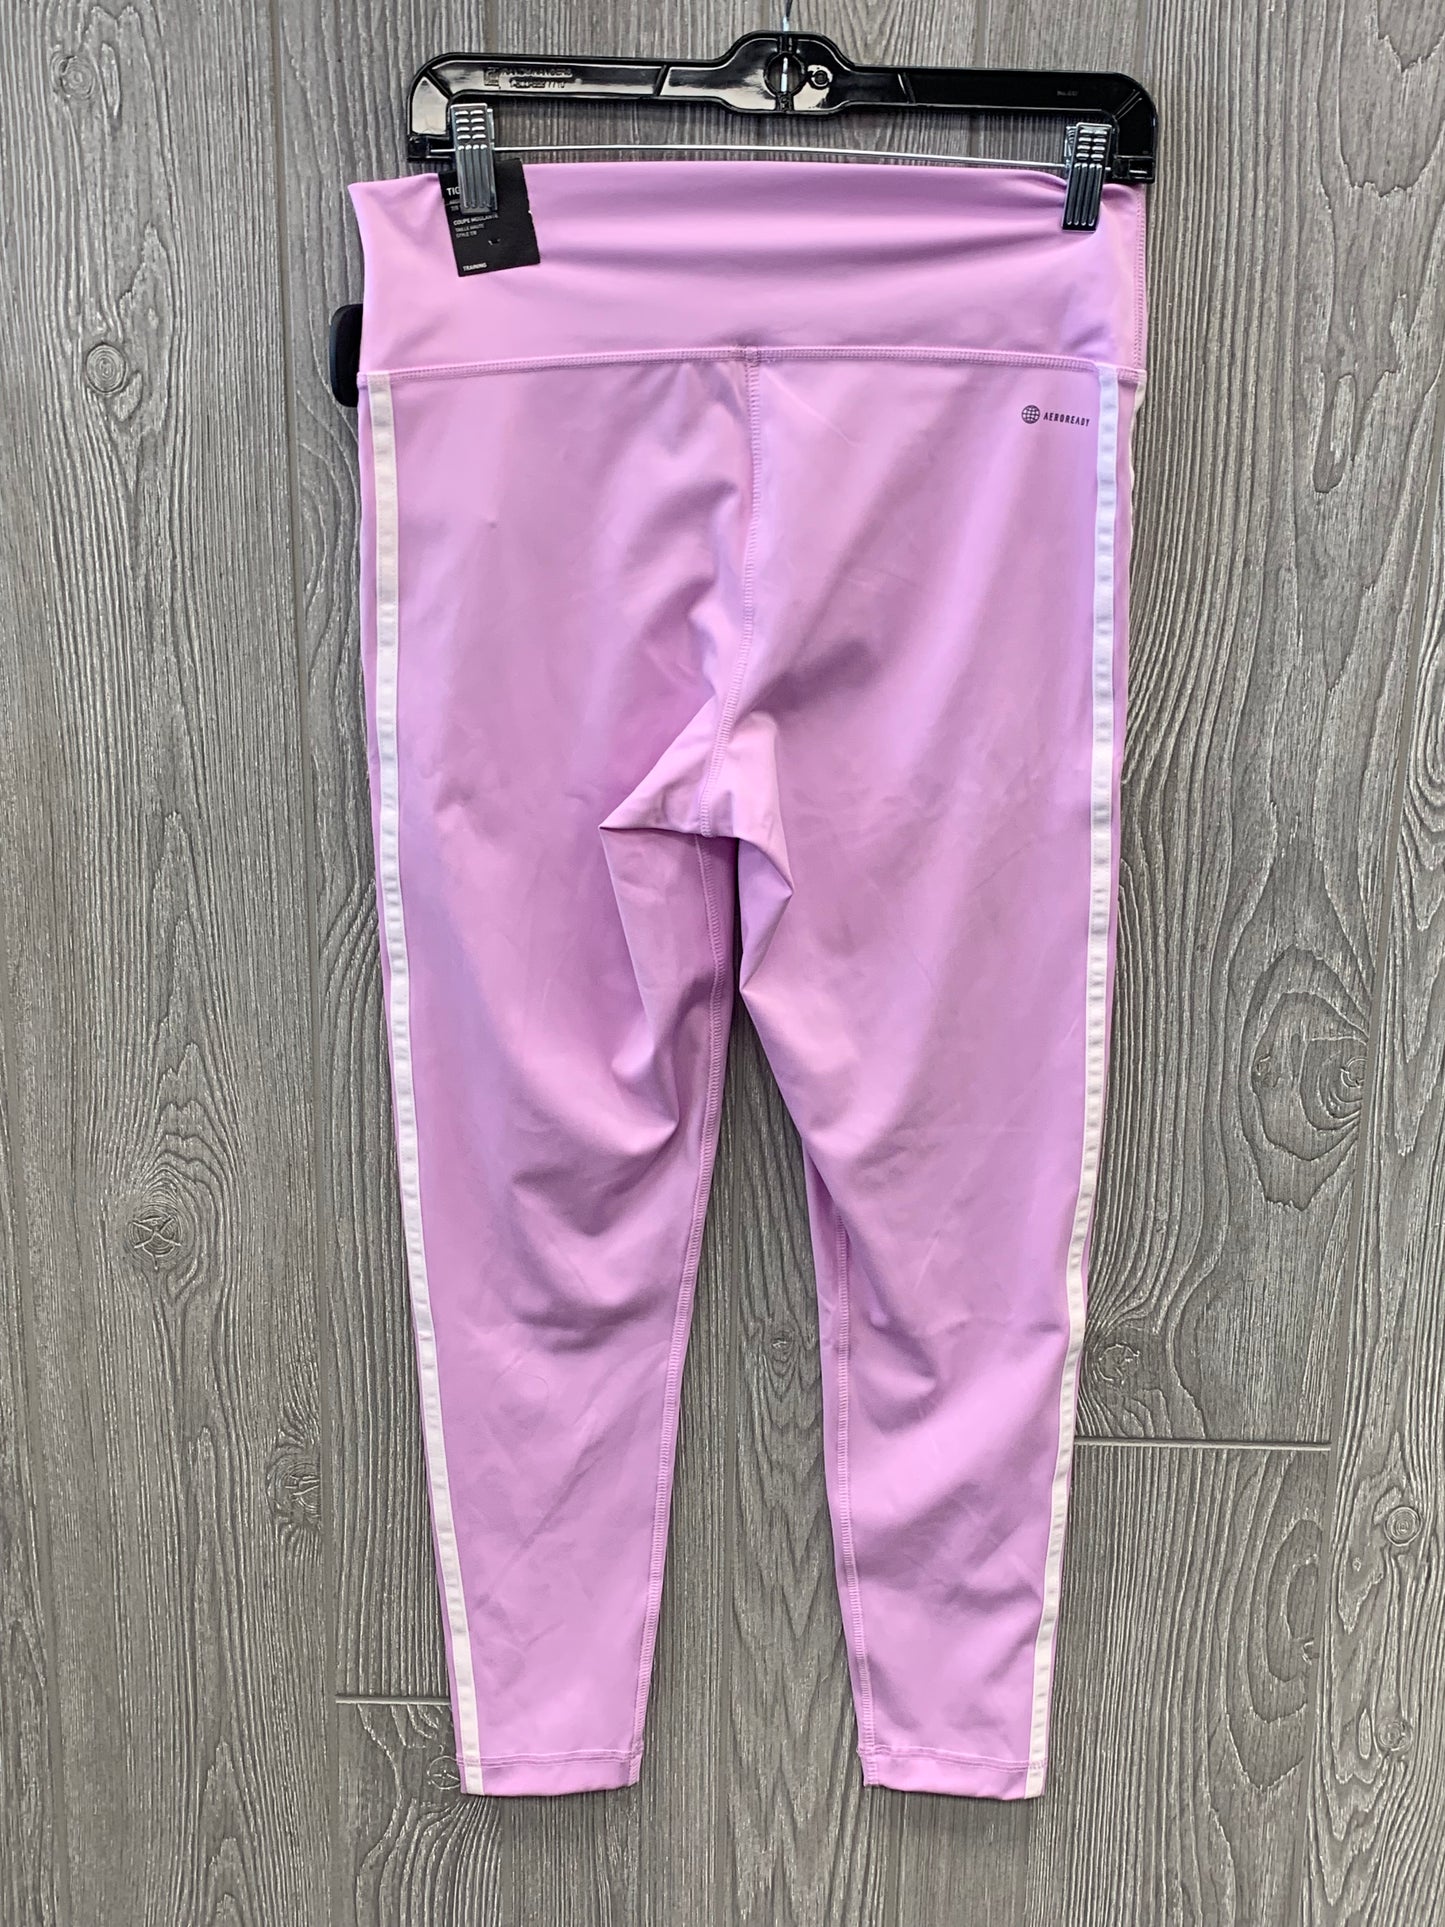 Athletic Leggings By Adidas  Size: L